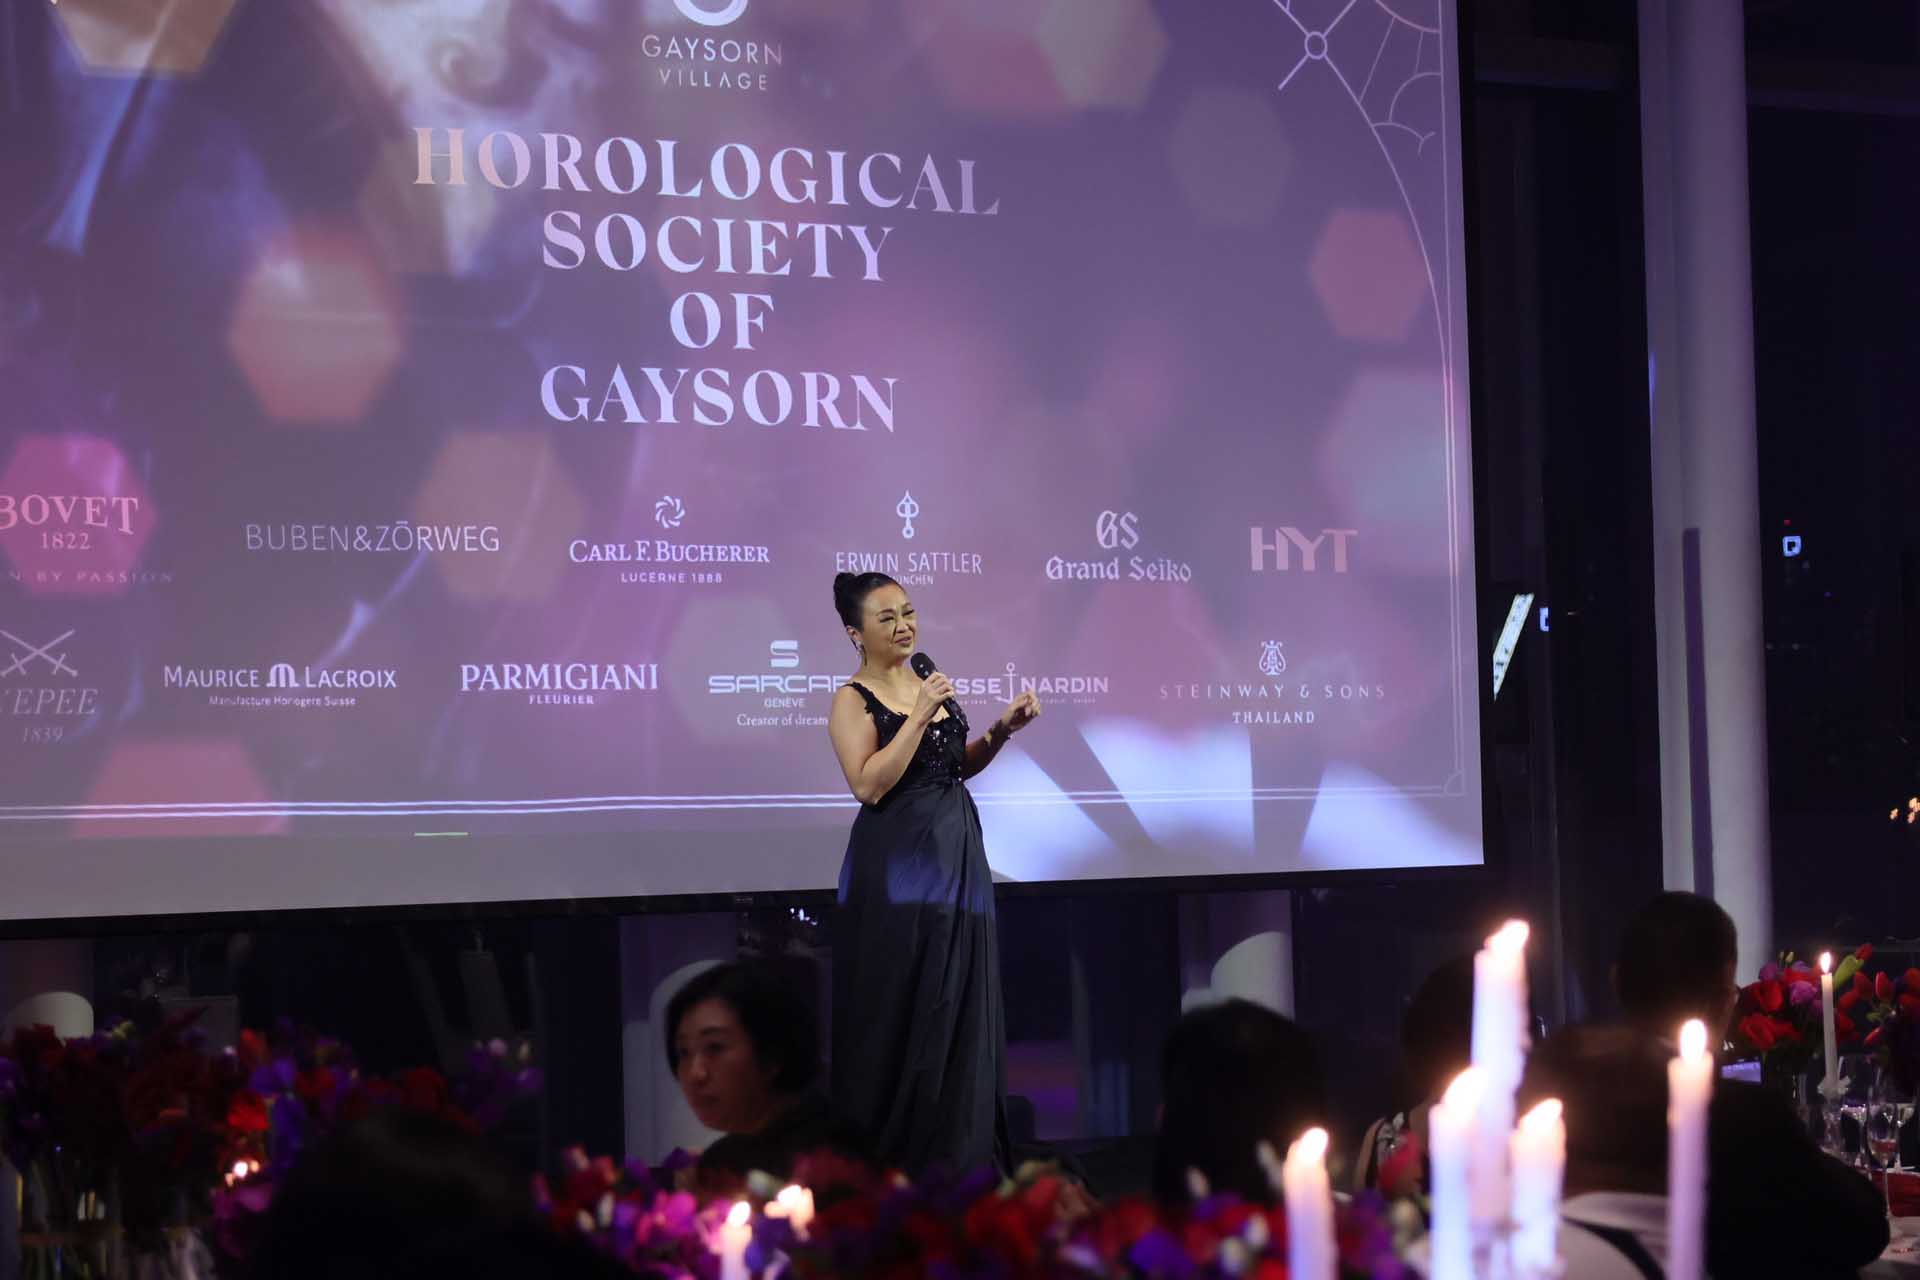 Horological Society of Gaysorn